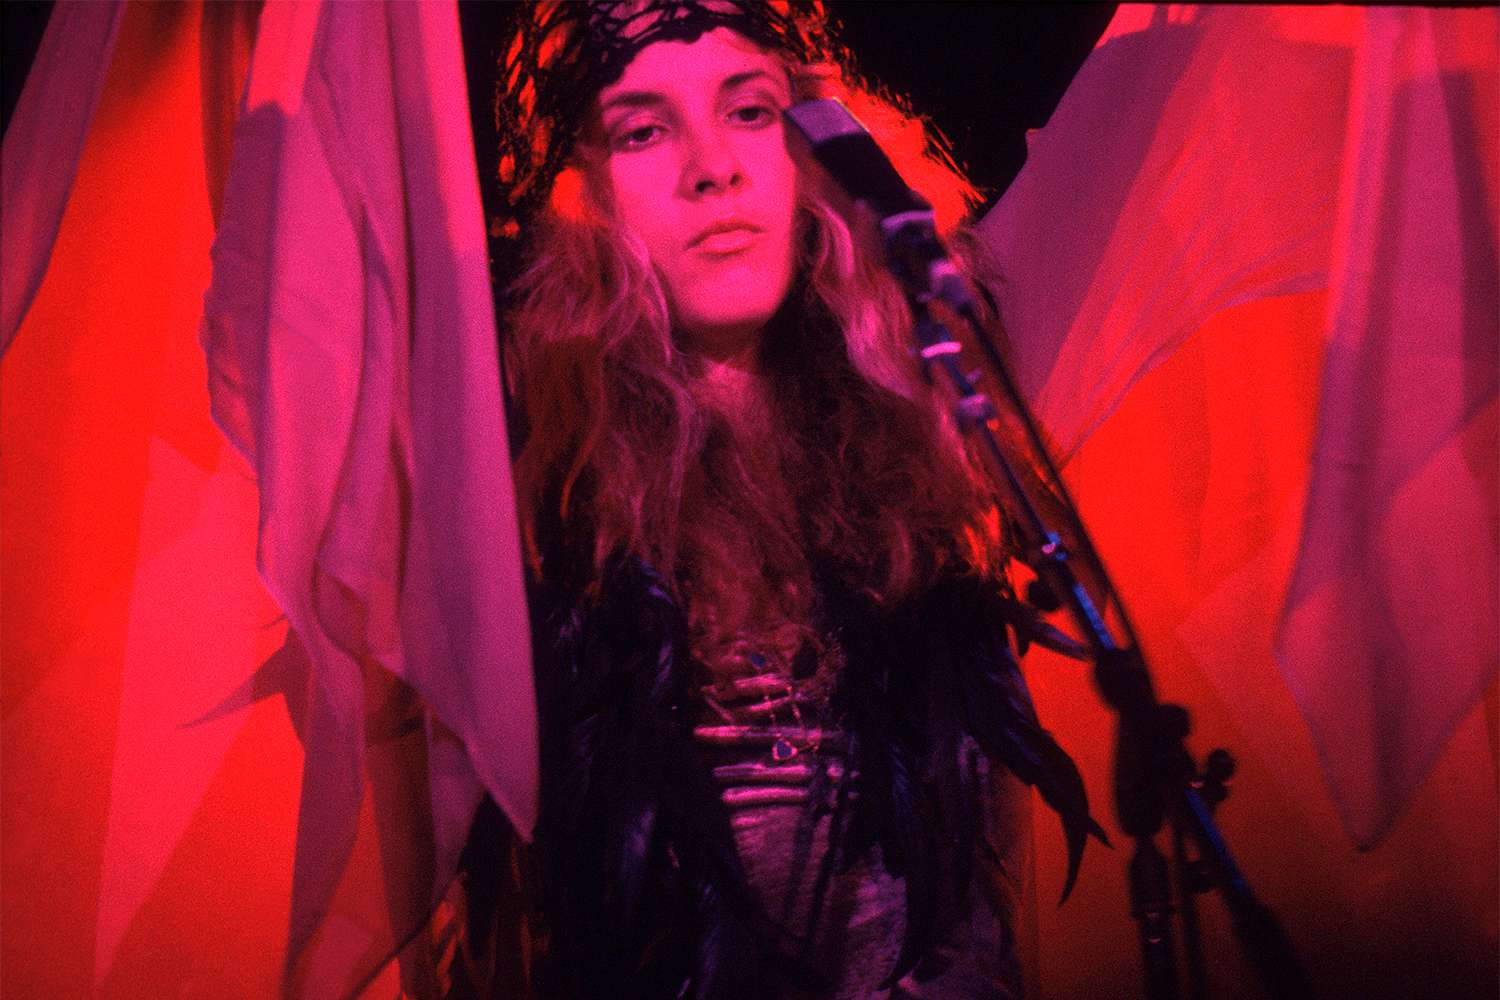 American singer Stevie Nicks, of the group Fleetwood Mac, performs onstage at the Alpine Valley Music Theater, East Troy, Wisconsin, July 19, 1978.